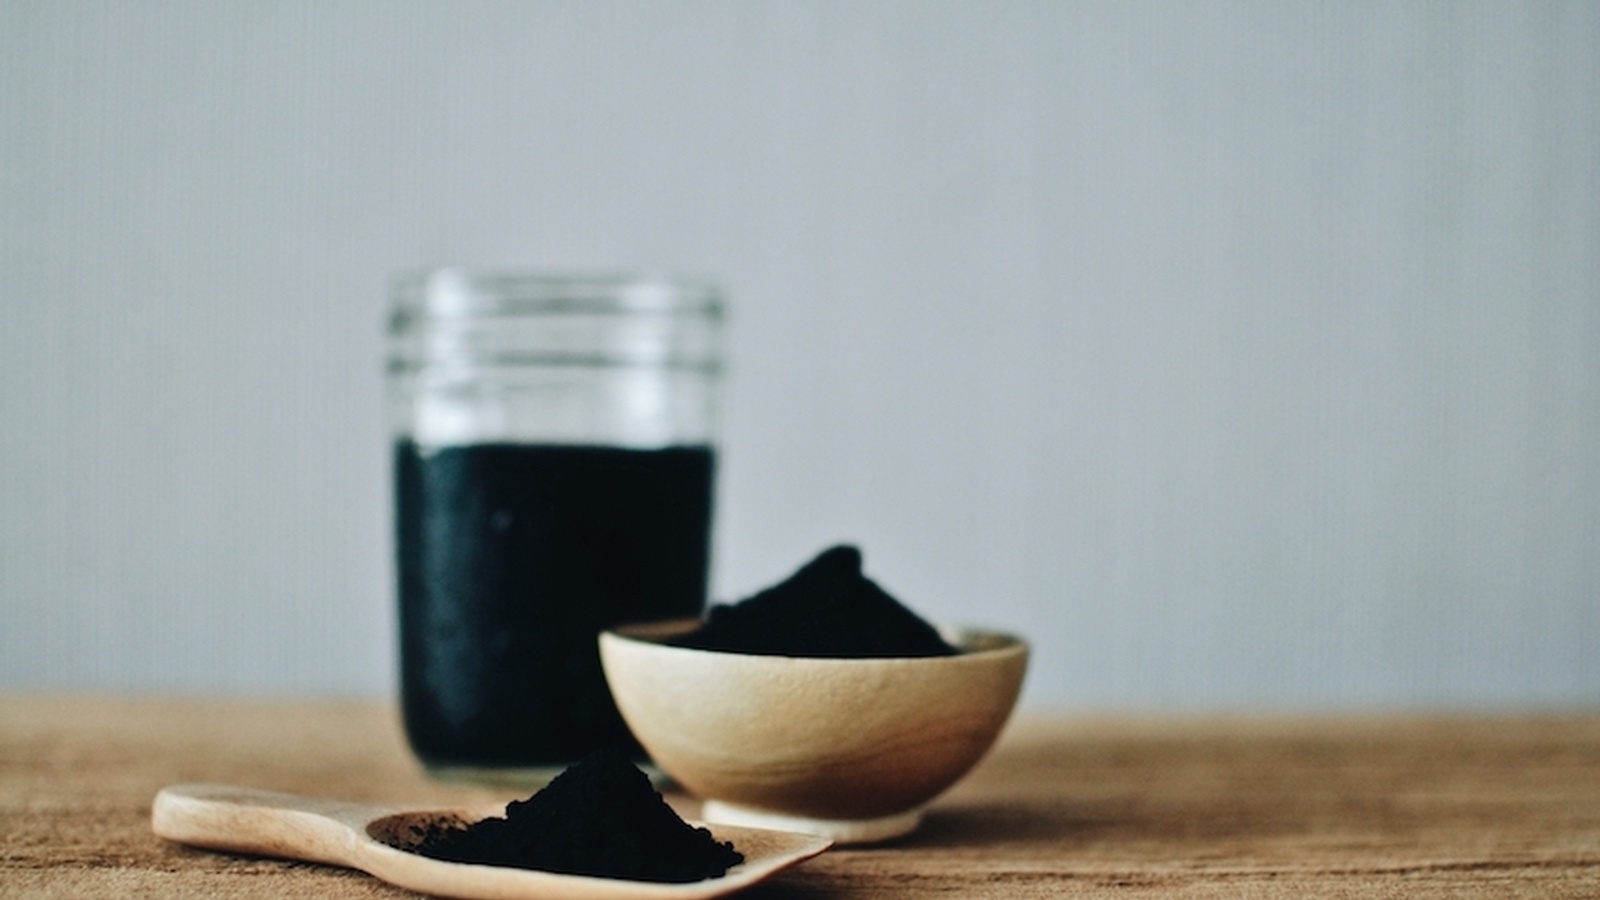 10 Activated Charcoal Benefits & Uses